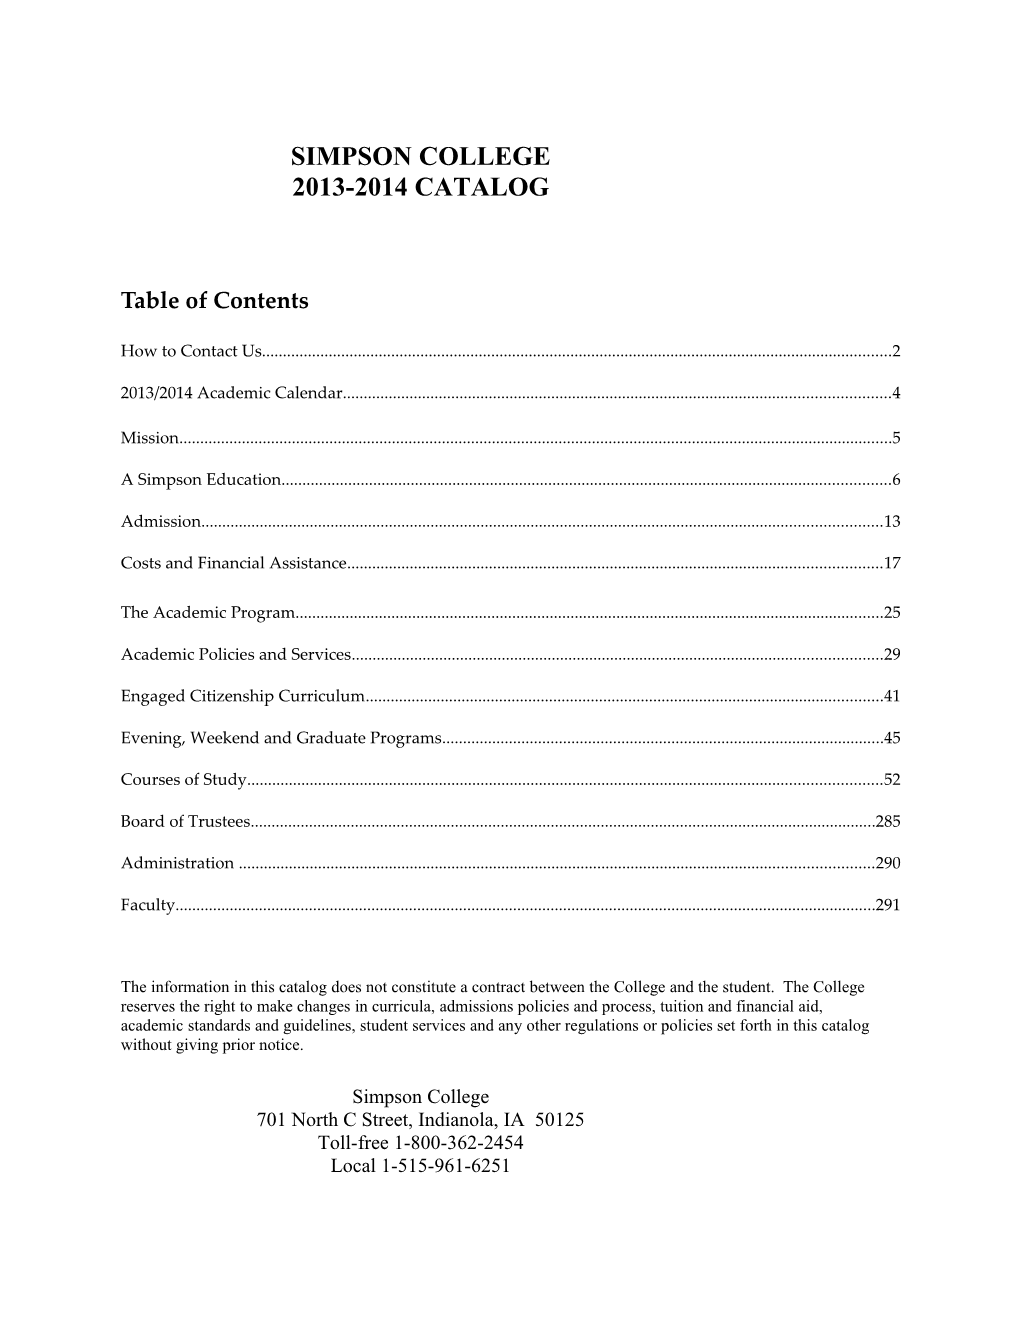 Table of Contents s610